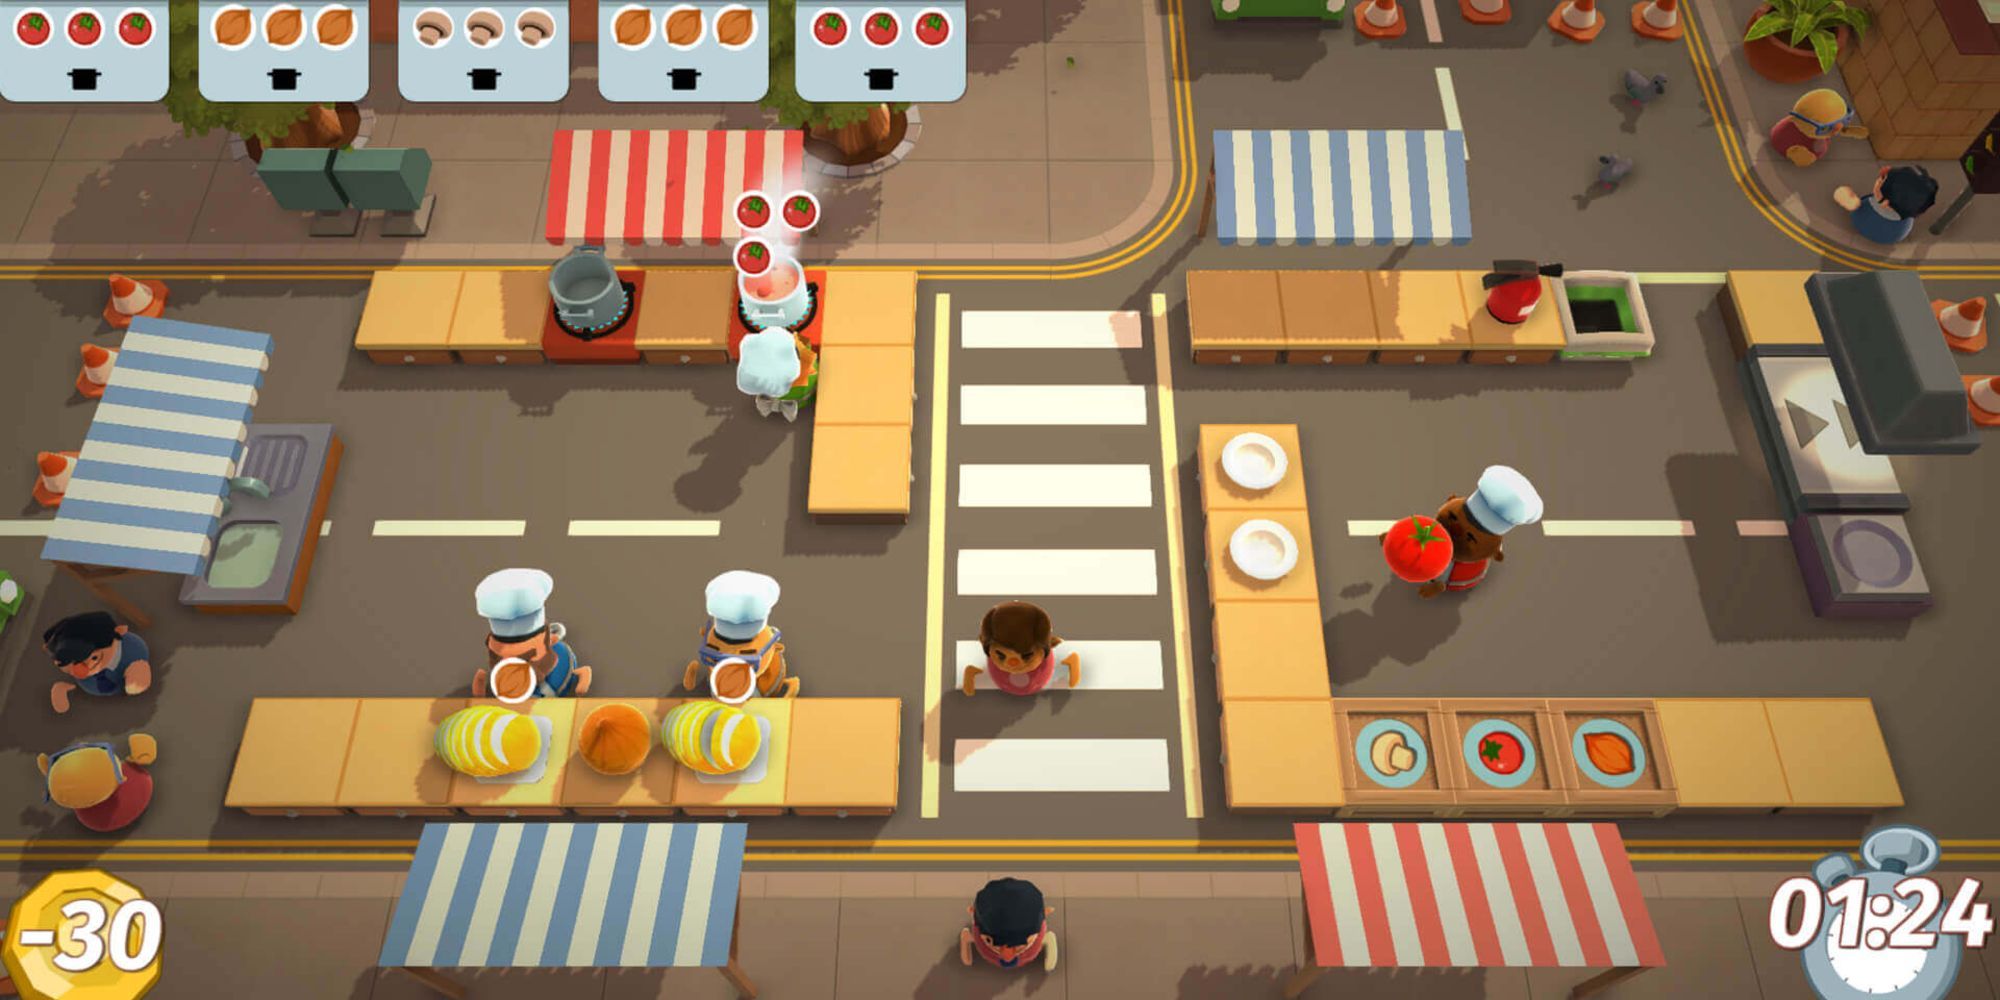 Food being made in Overcooked game